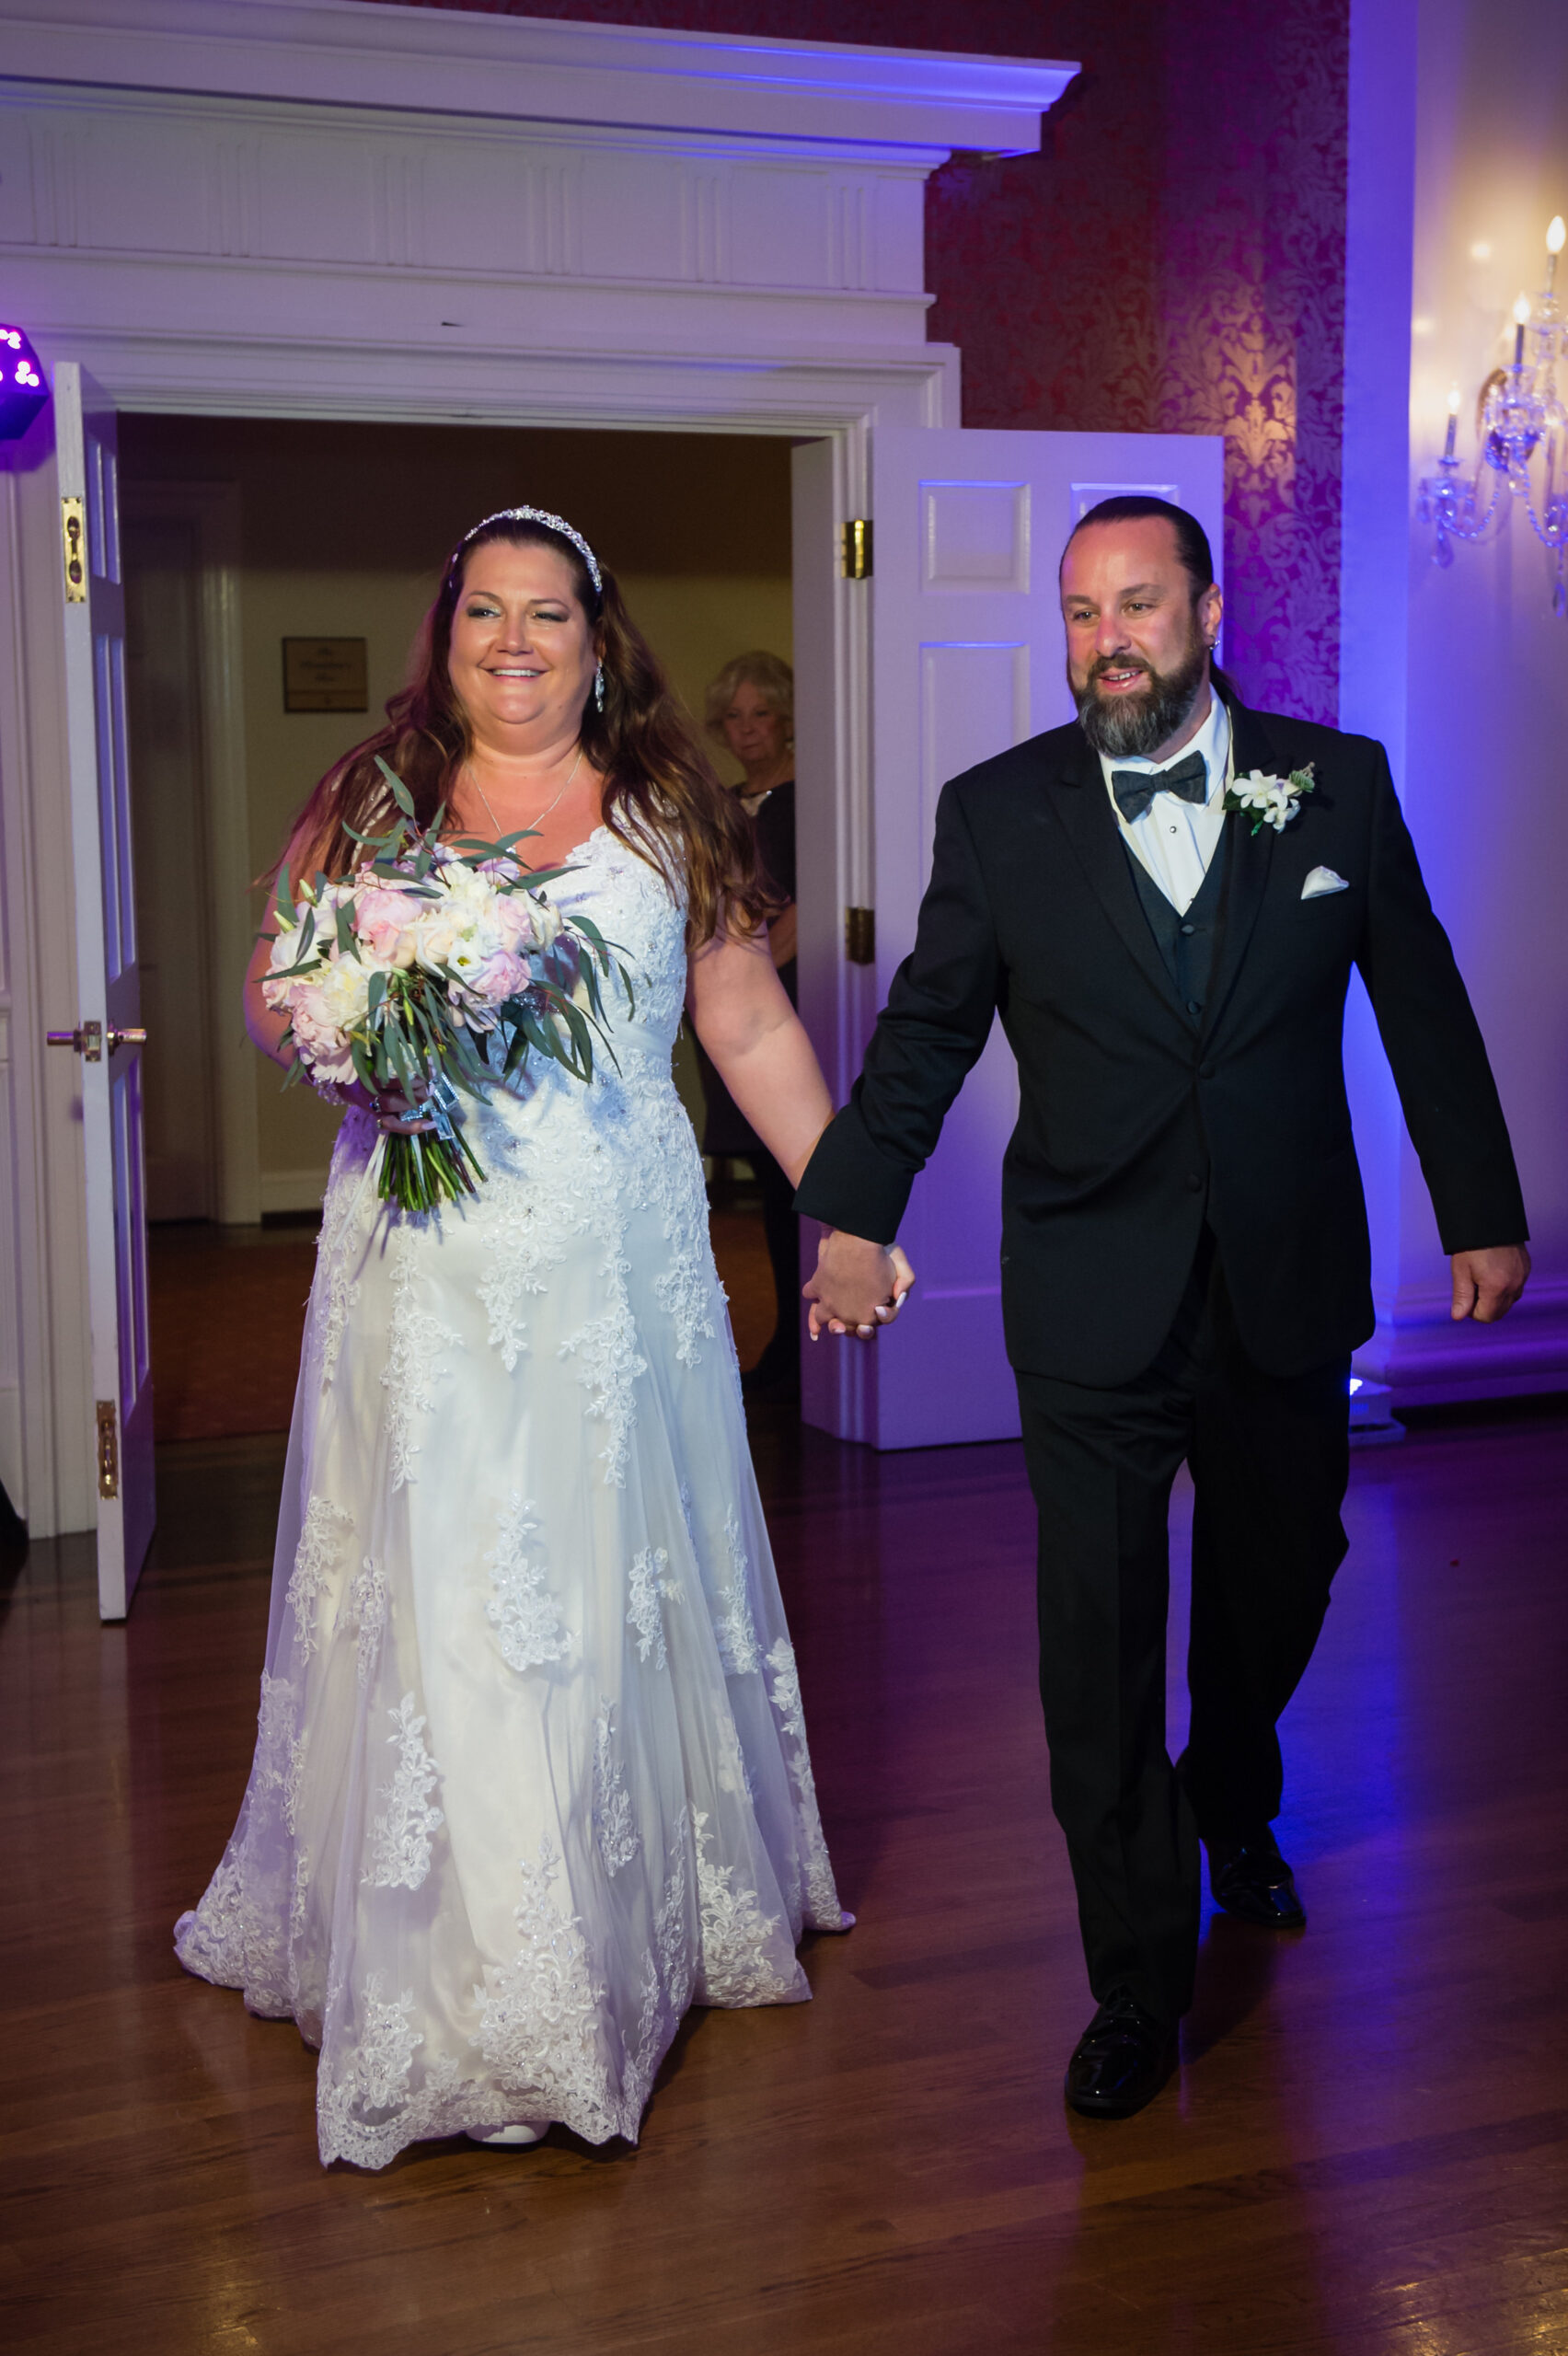  Kim &amp; Mark made their grand entrance into the color-filled room and began their long awaited first dance as husband &amp; wife. They chose the classic "You're My Home" by Billy Joel. 